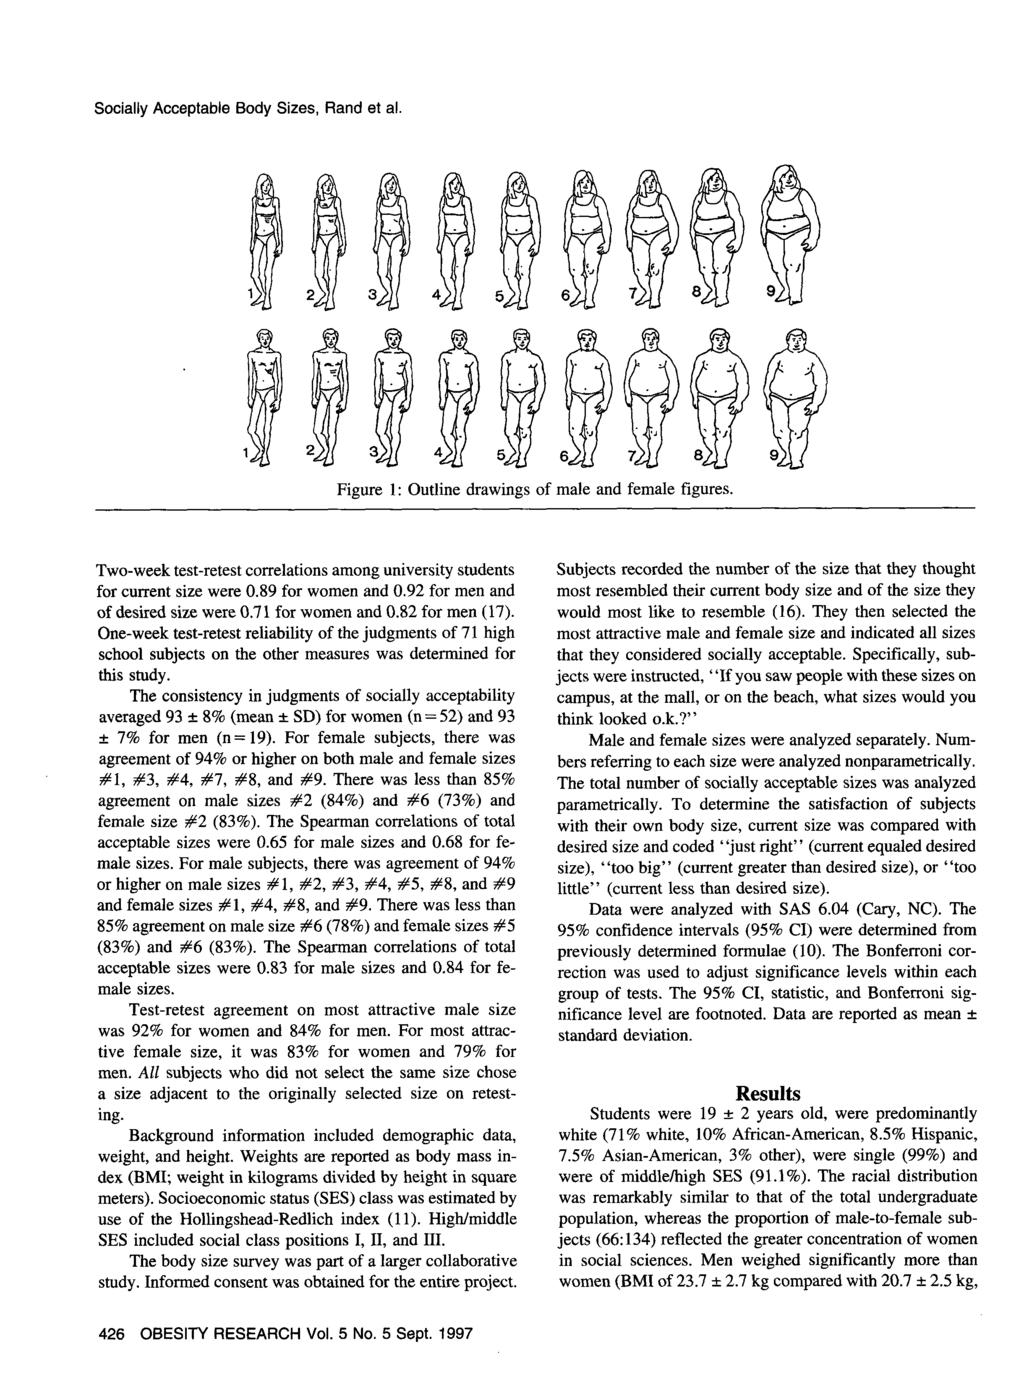 Figure 1: Outline drawings of male and female figures. Two-week test-retest correlations among university students for current size were 0.89 for women and 0.92 for men and of desired size were 0.